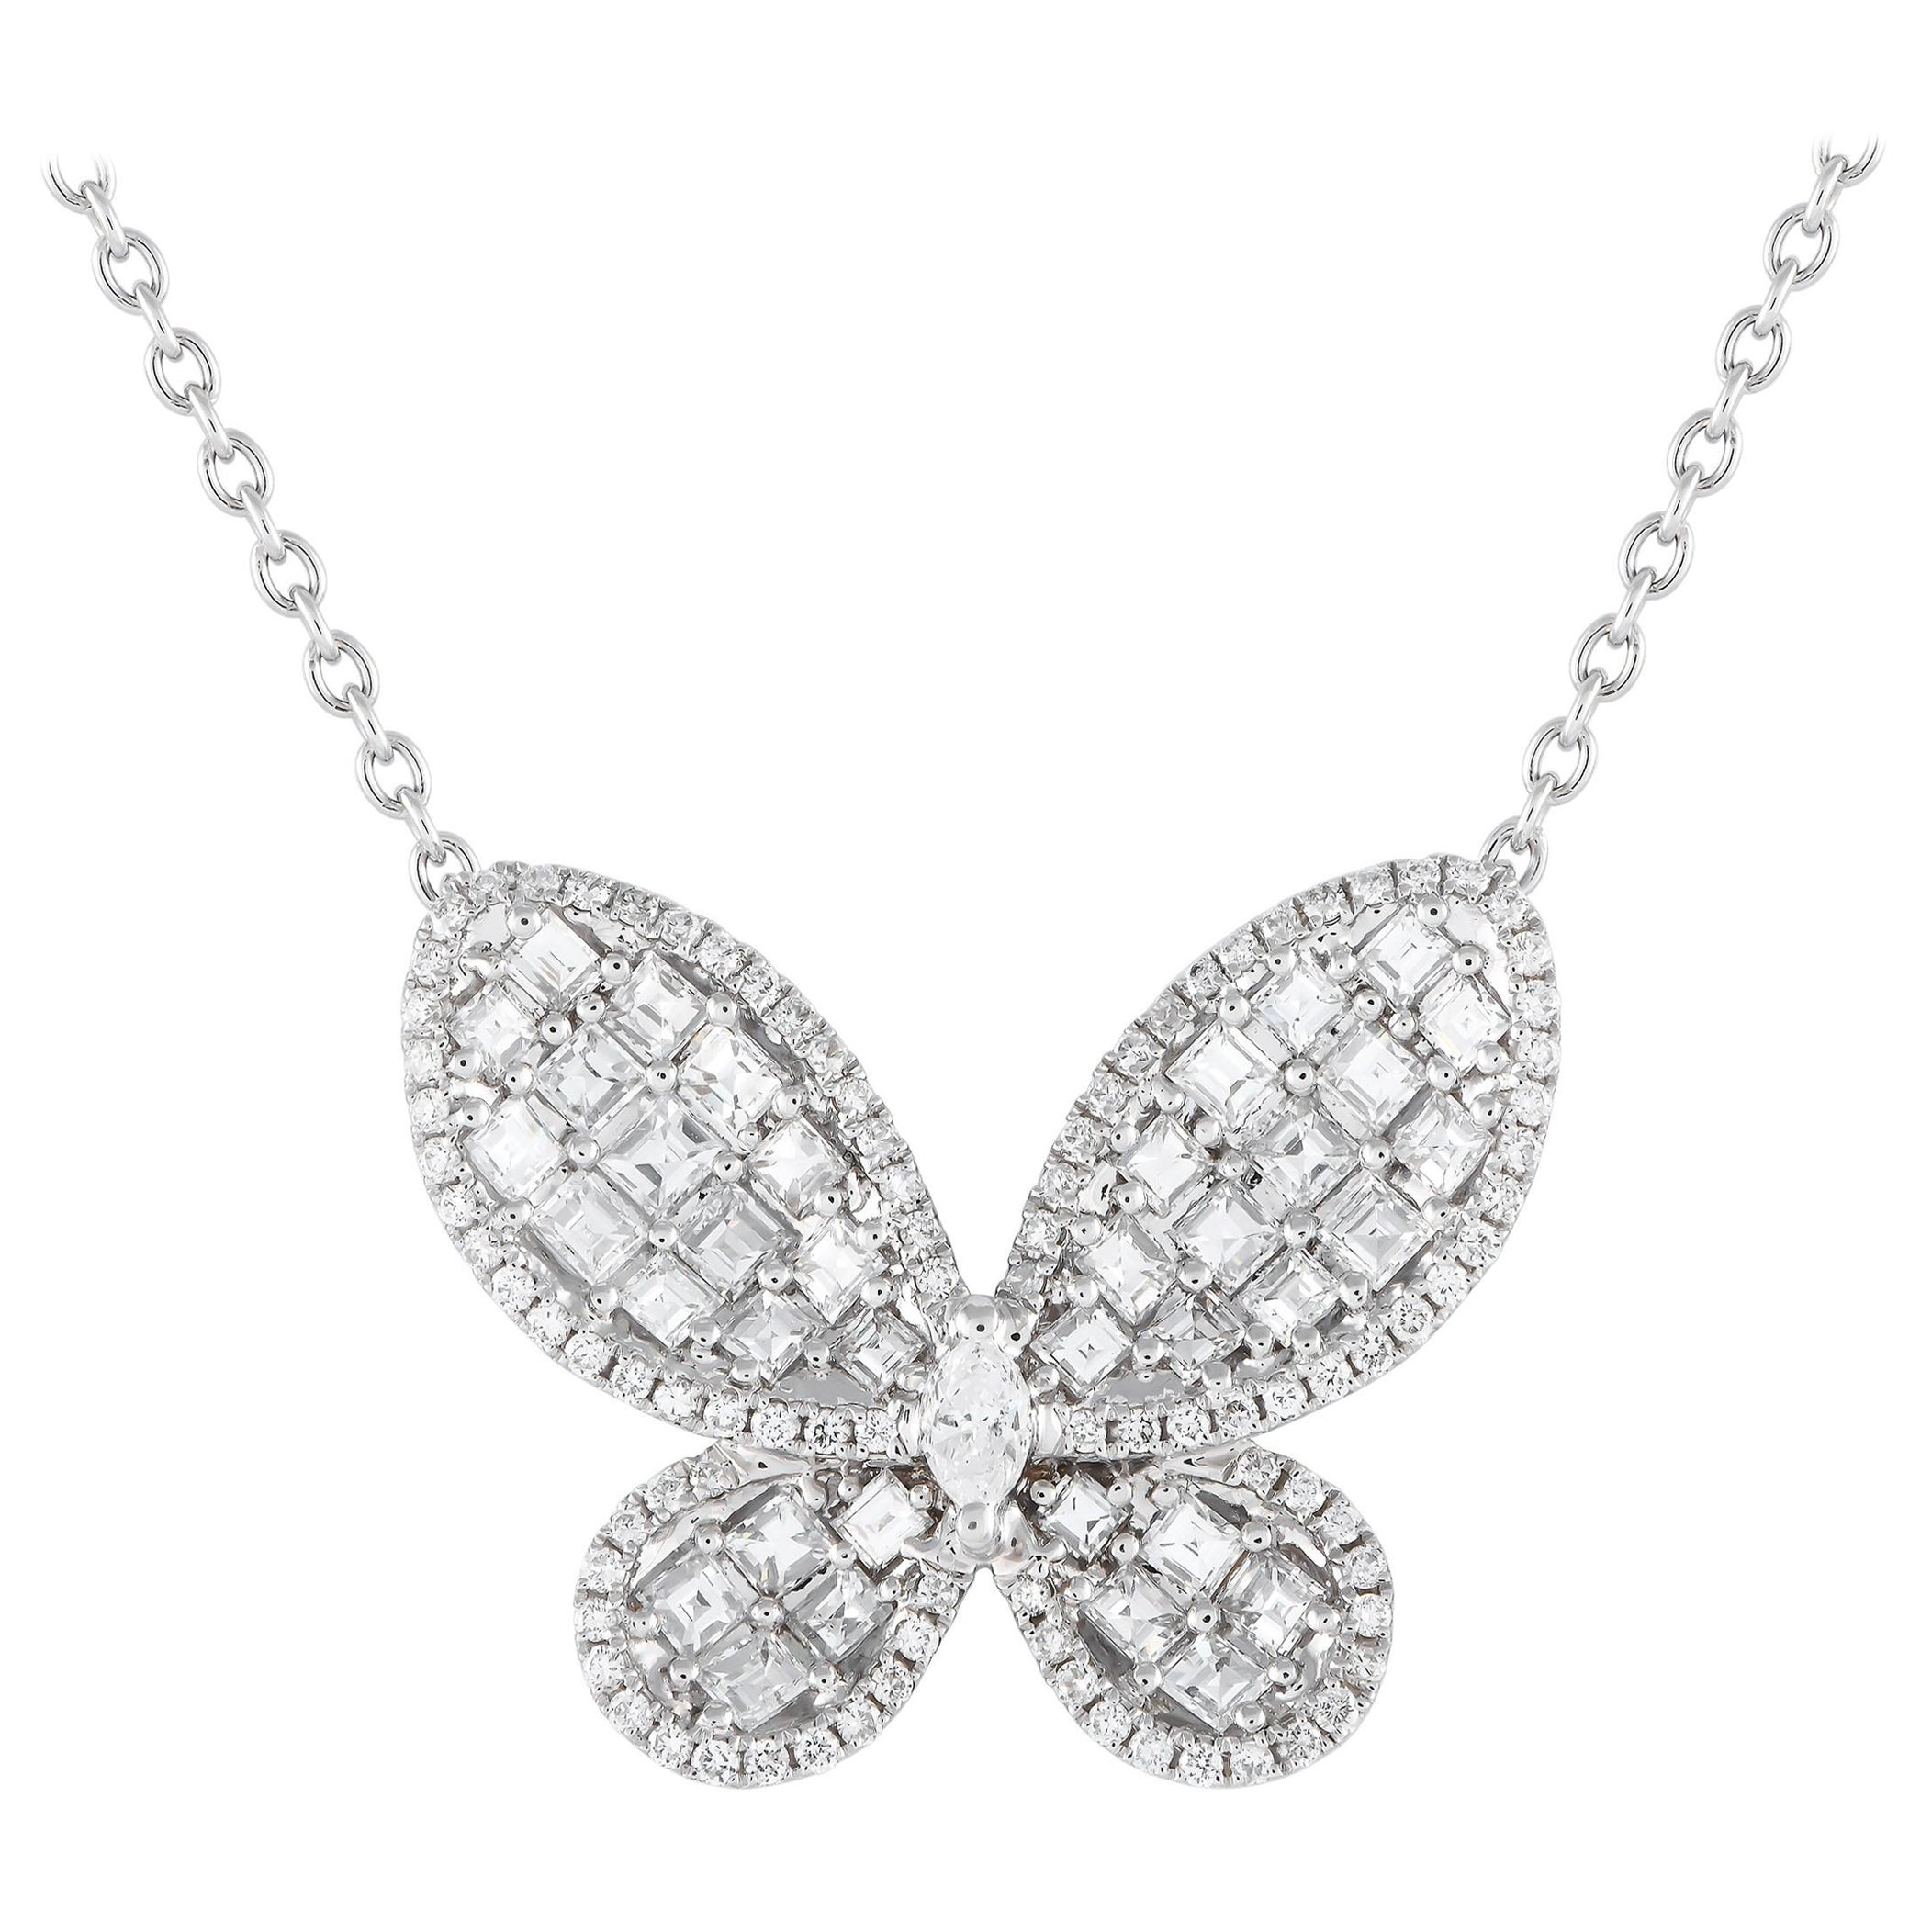 LB Exclusive 18K White Gold 1.50ct Diamond Butterfly Necklace